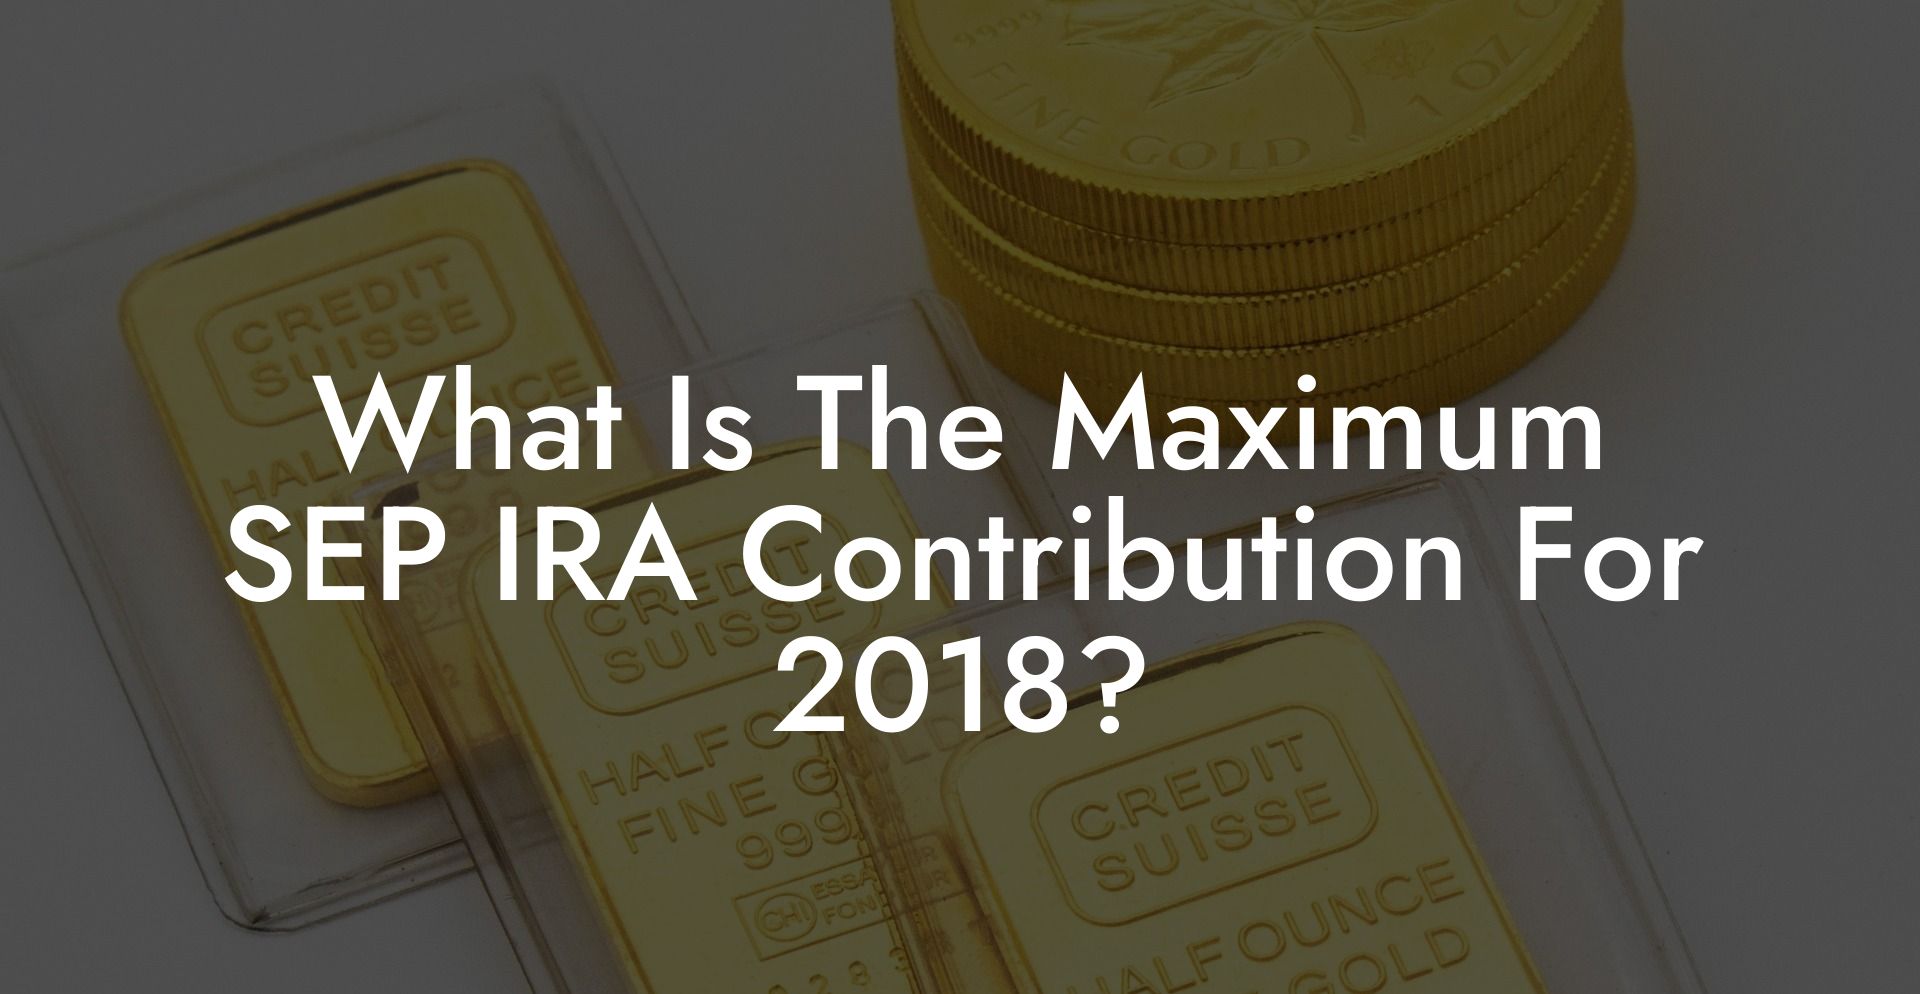 What Is The Maximum SEP IRA Contribution For 2018?